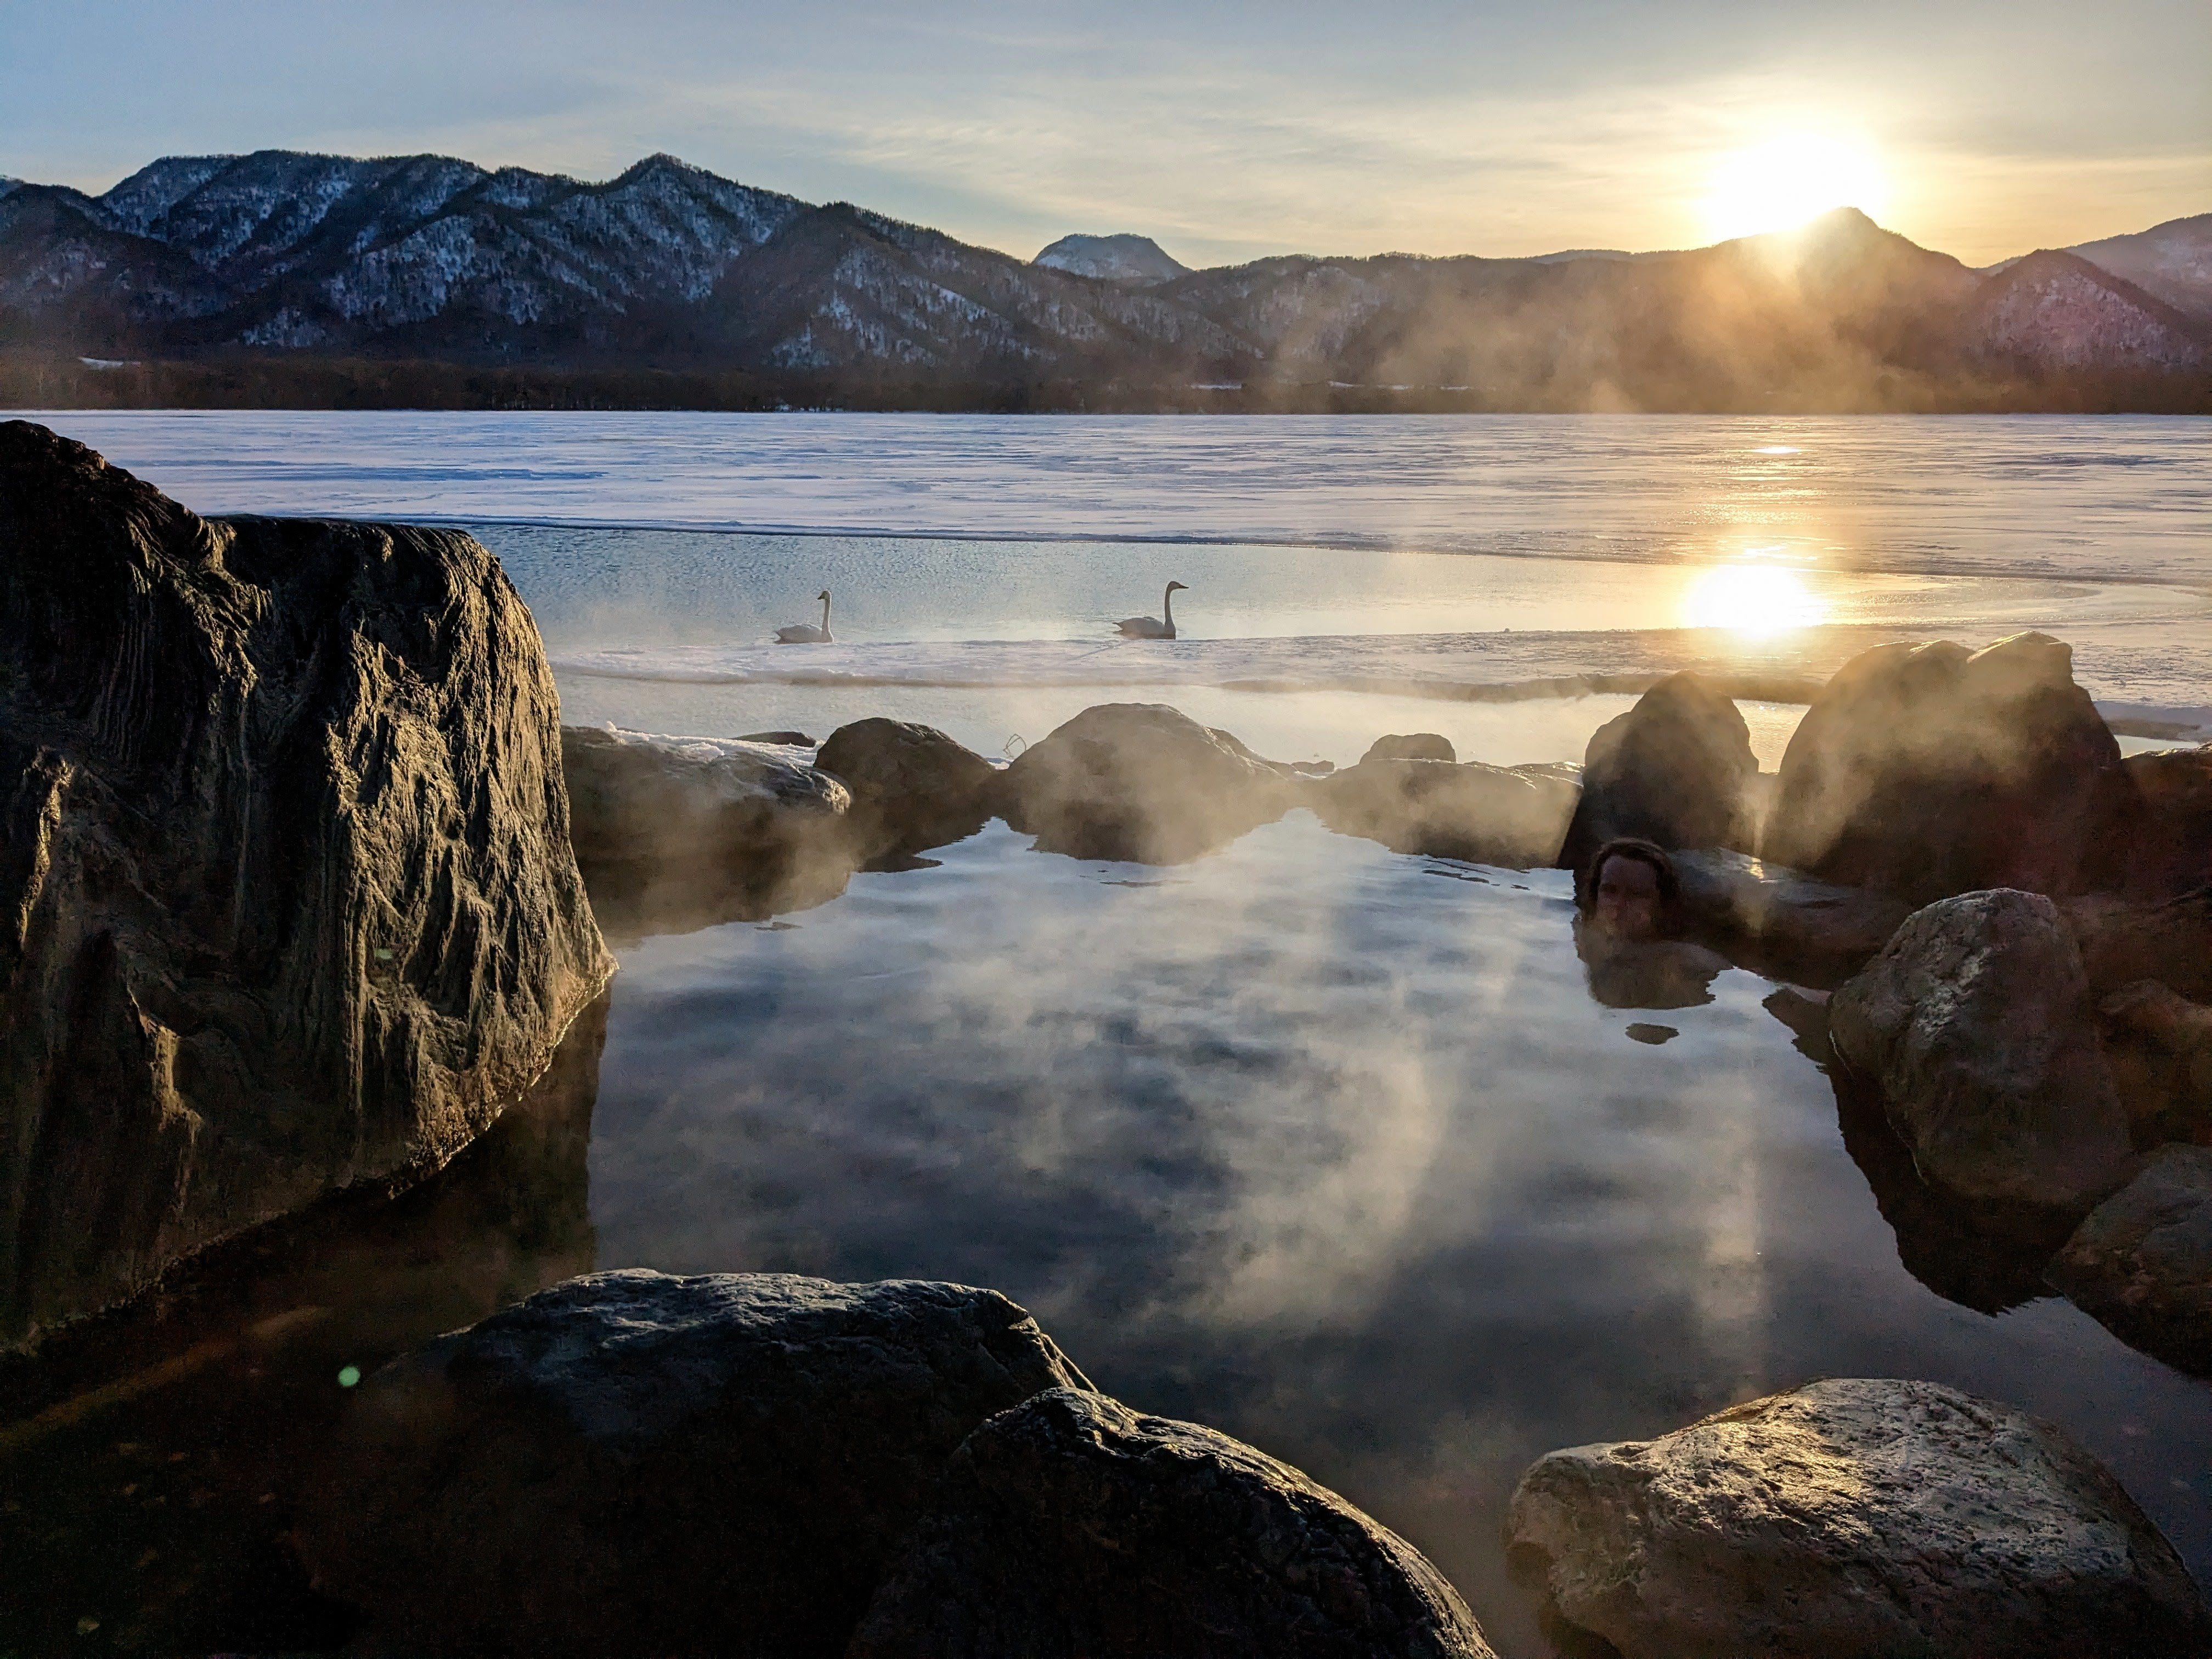 A bather soaks in a wild onsen on the shore of Lake Kussharo. There is ice on the surface of the lake and a pair of Whooper Swans float in an open patch of water. It is sunset and the suns rays are backlighting the steam rising off the hot spring pool.